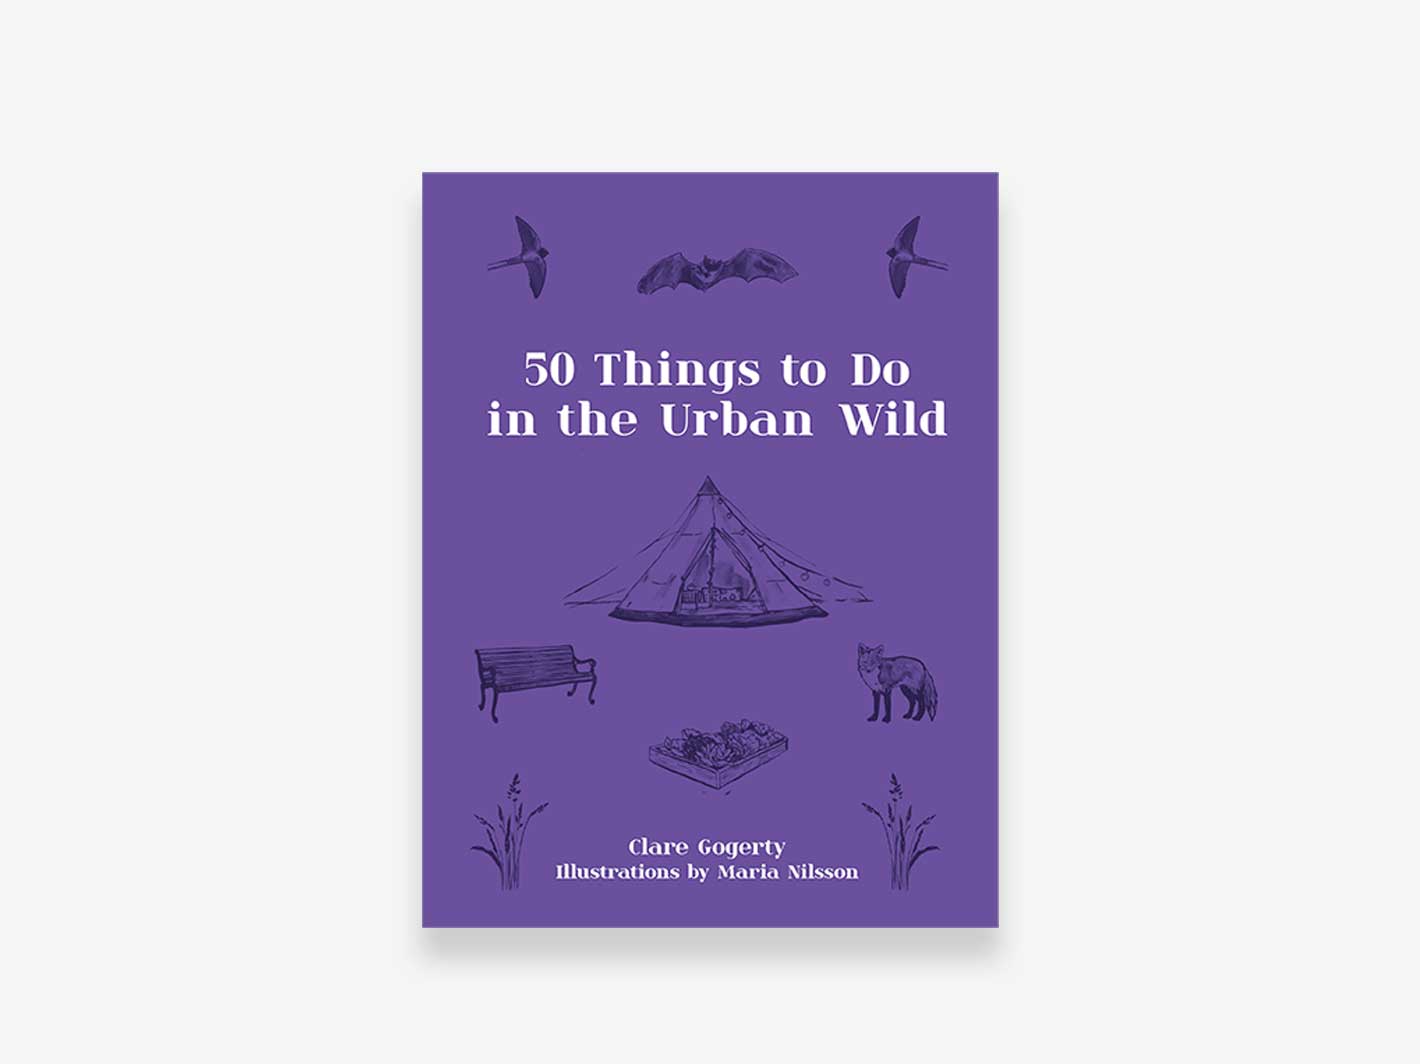 50 Things To Do in the Urban Wild